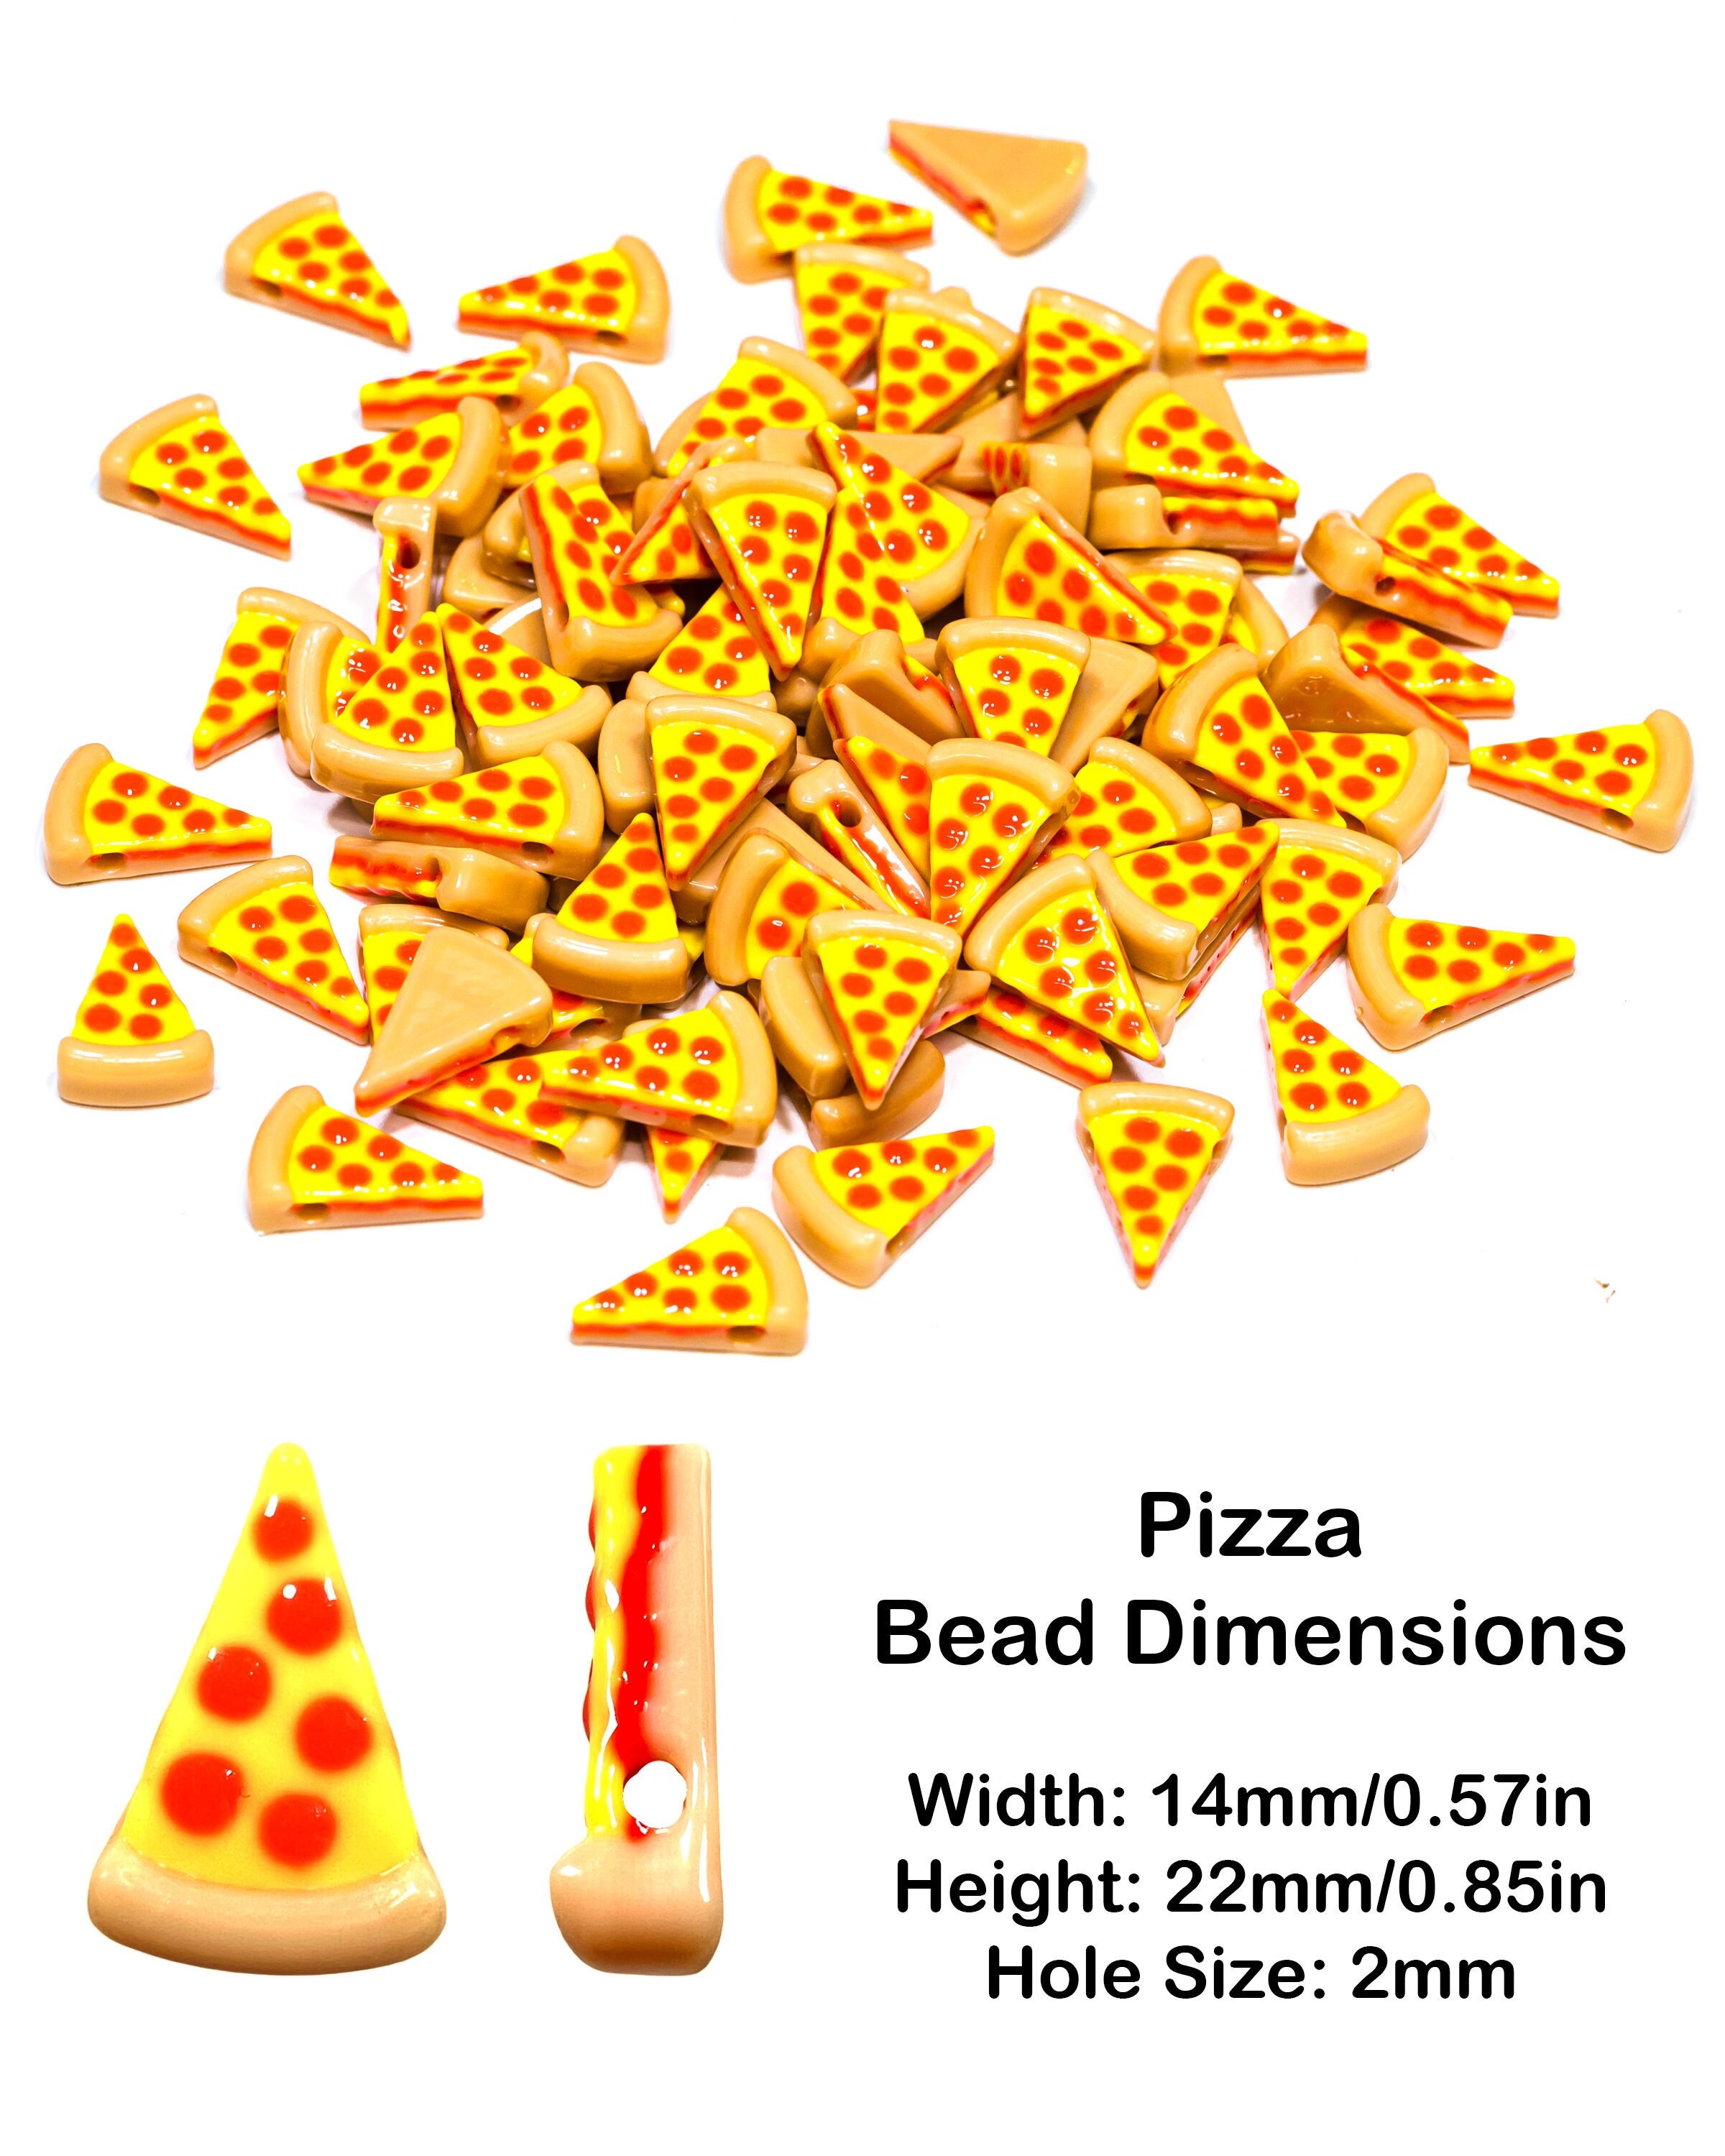 30 Pcs Resin Pizza Charms Kawaii Imitation Food Charms Cute Food Pisa Pie Charms with Loops for DIY Craft Supplies, Women's, Size: One Size